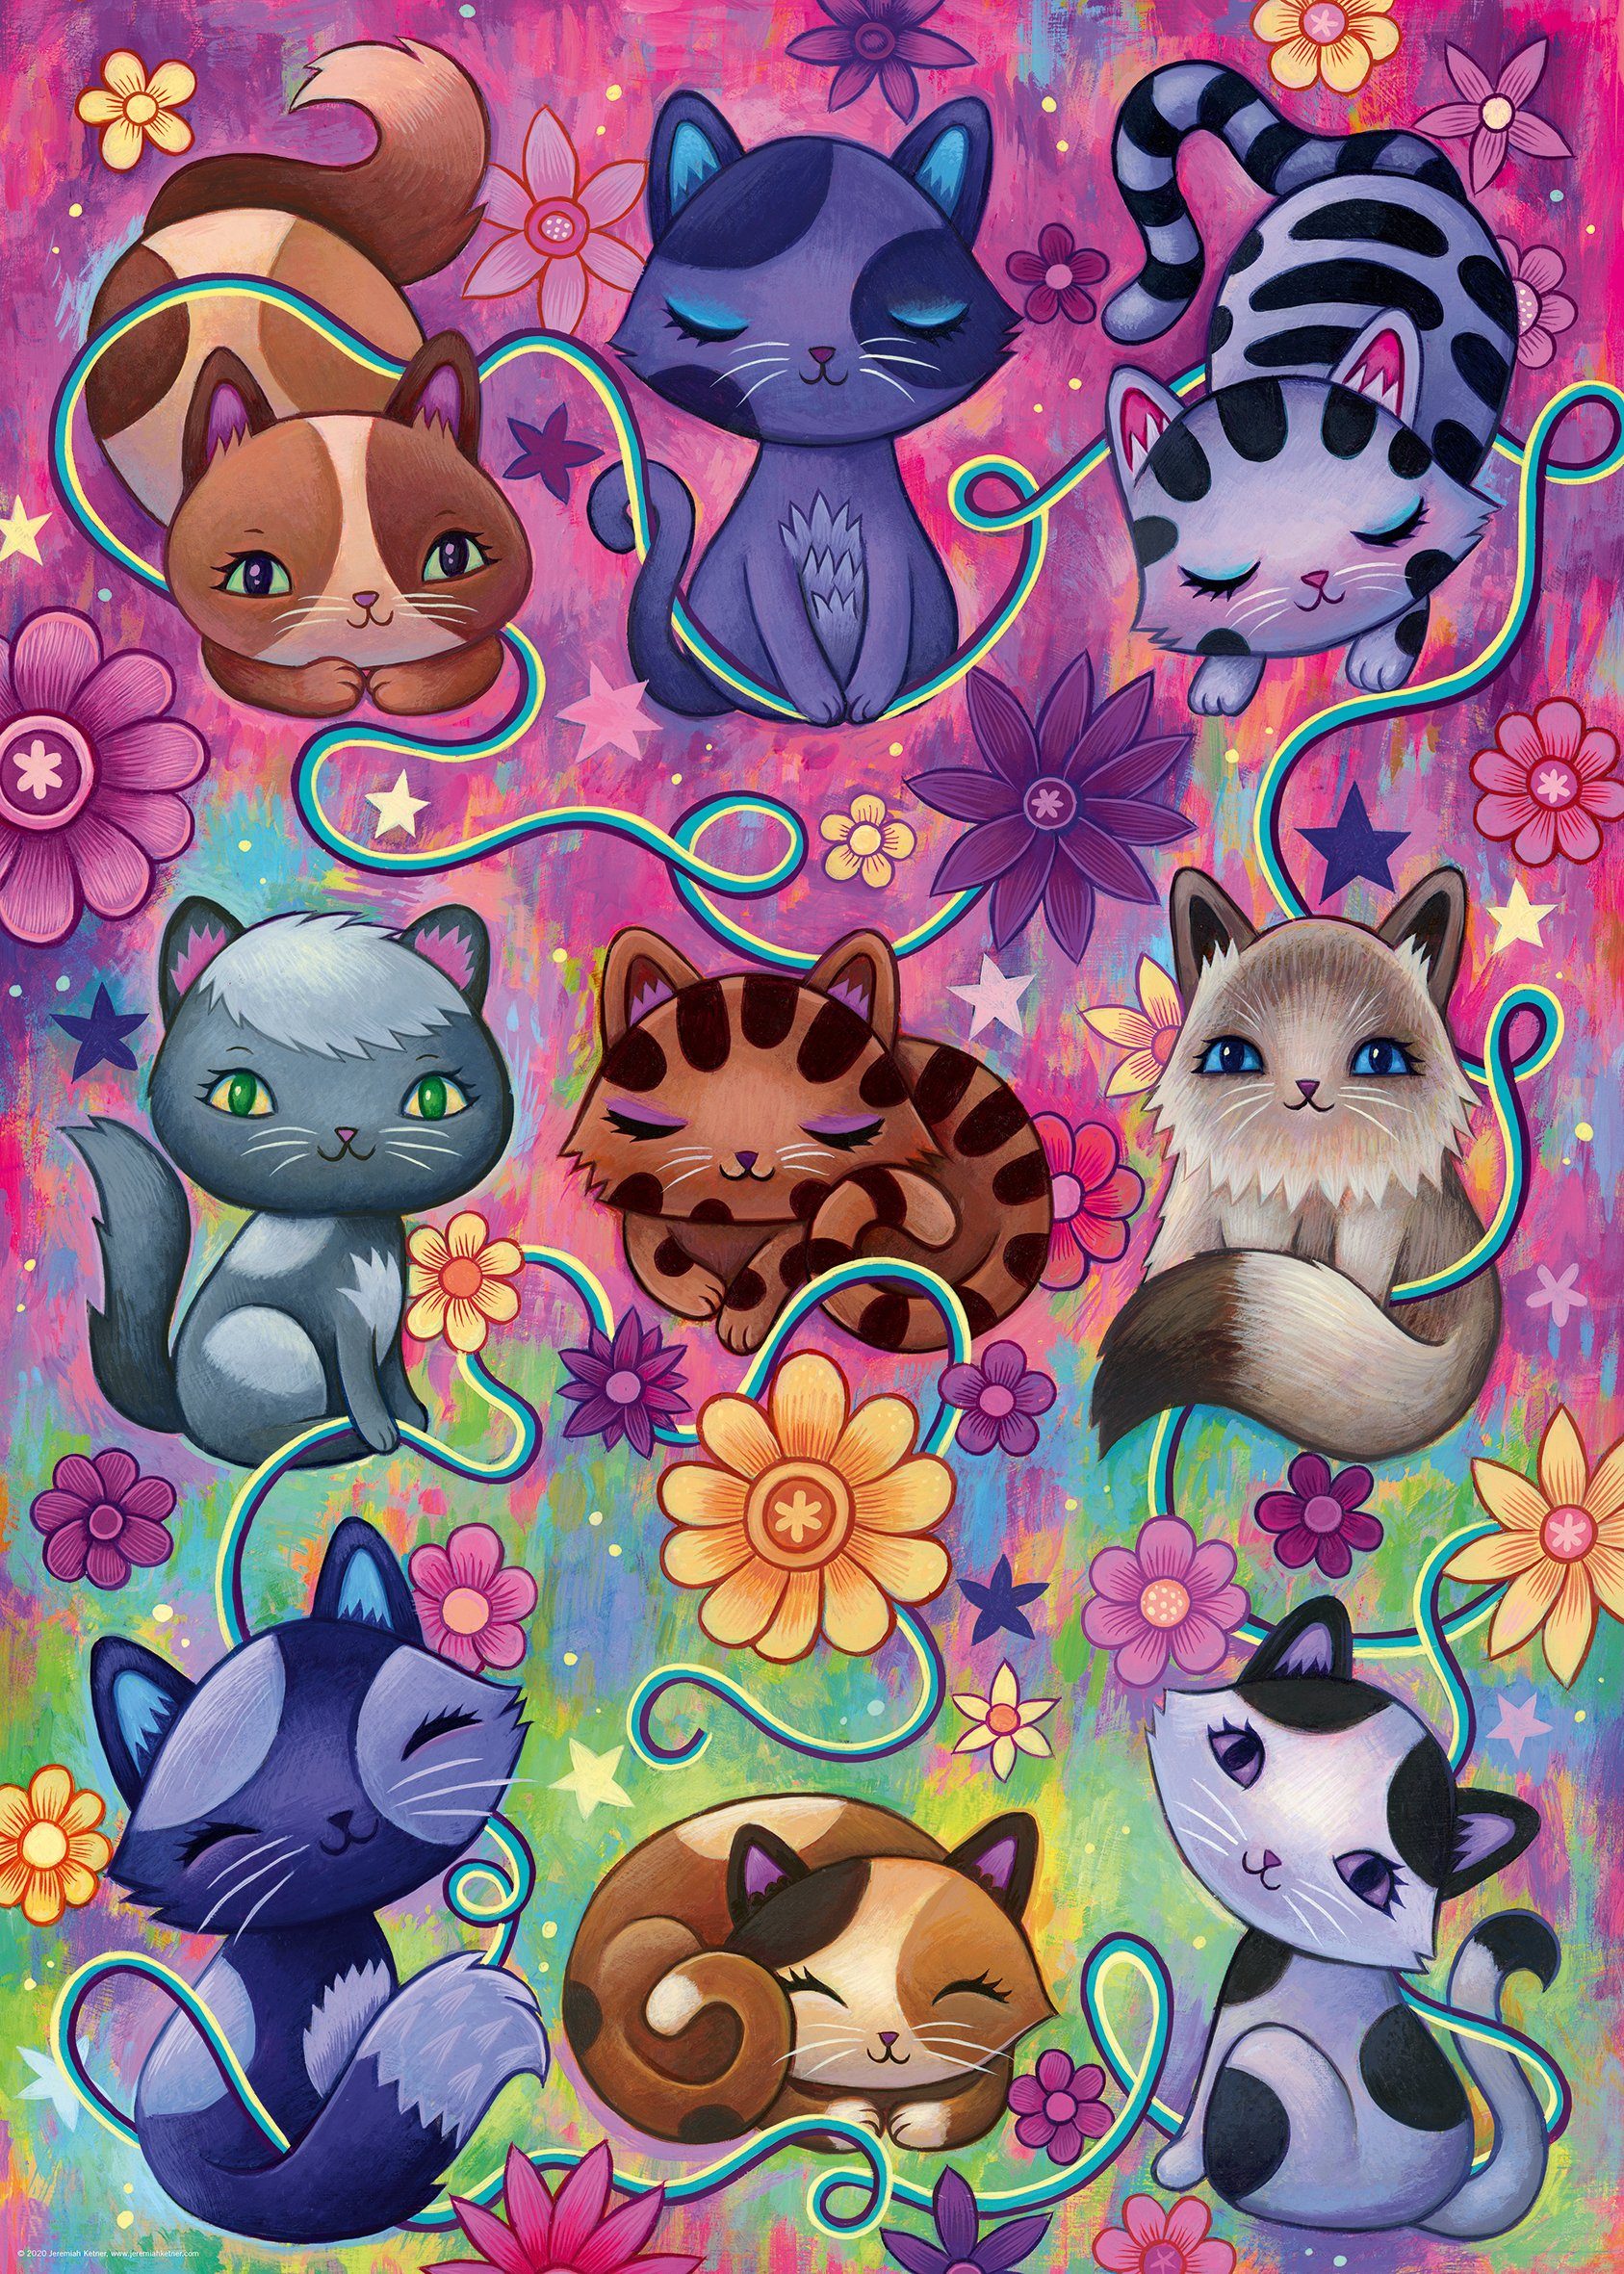 HEYE Puzzle Kitty Cats / Germany in Made Dreaming, Puzzleteile, 1000